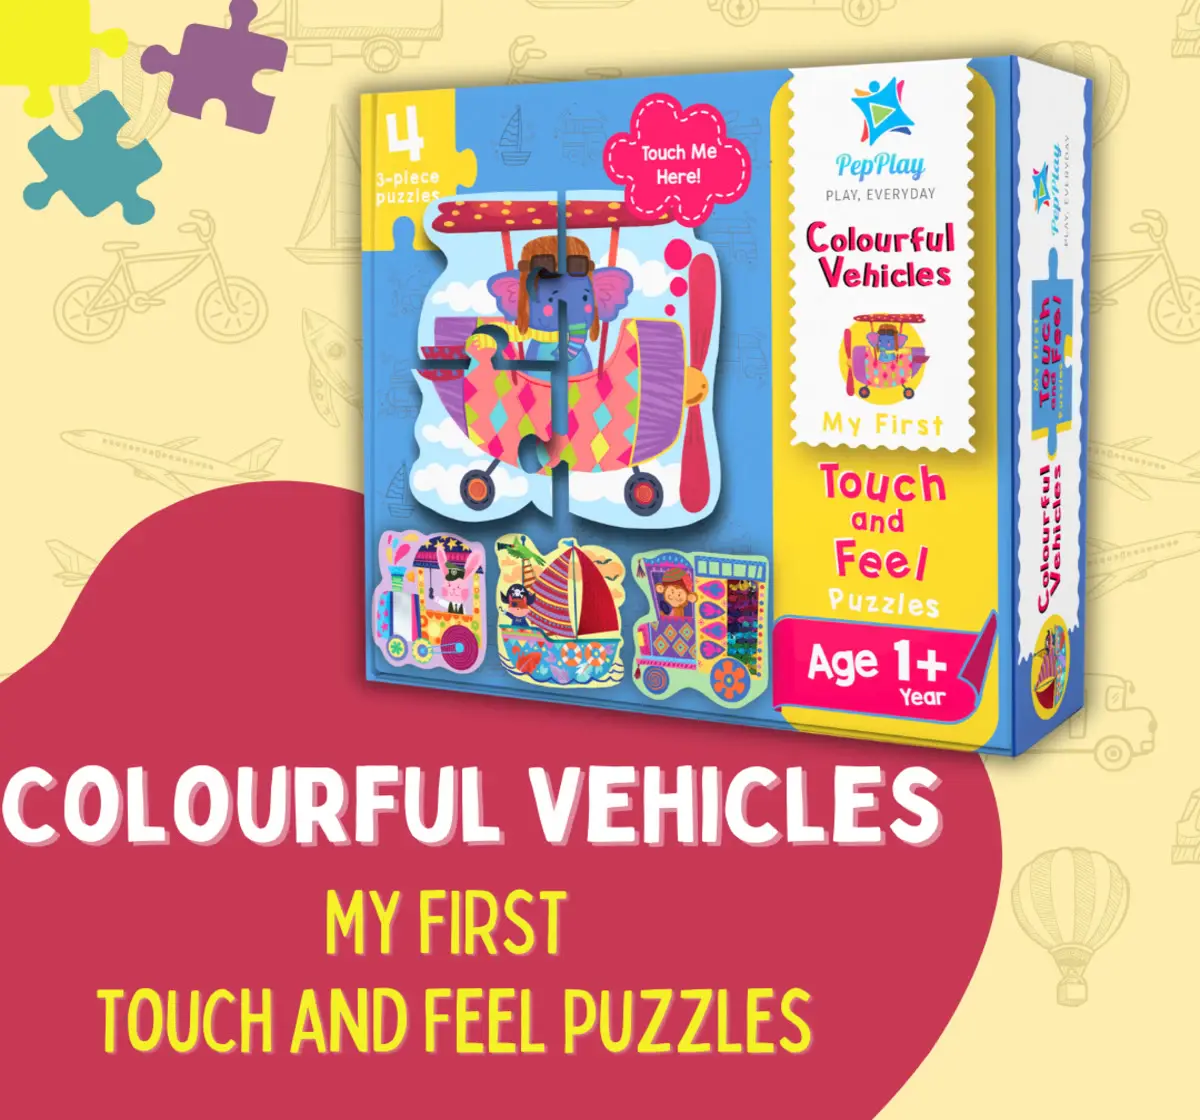 PepPlay My First Touch & Feel Puzzles Colourful Vehicles For Kids of Age 12M+, Multicolour